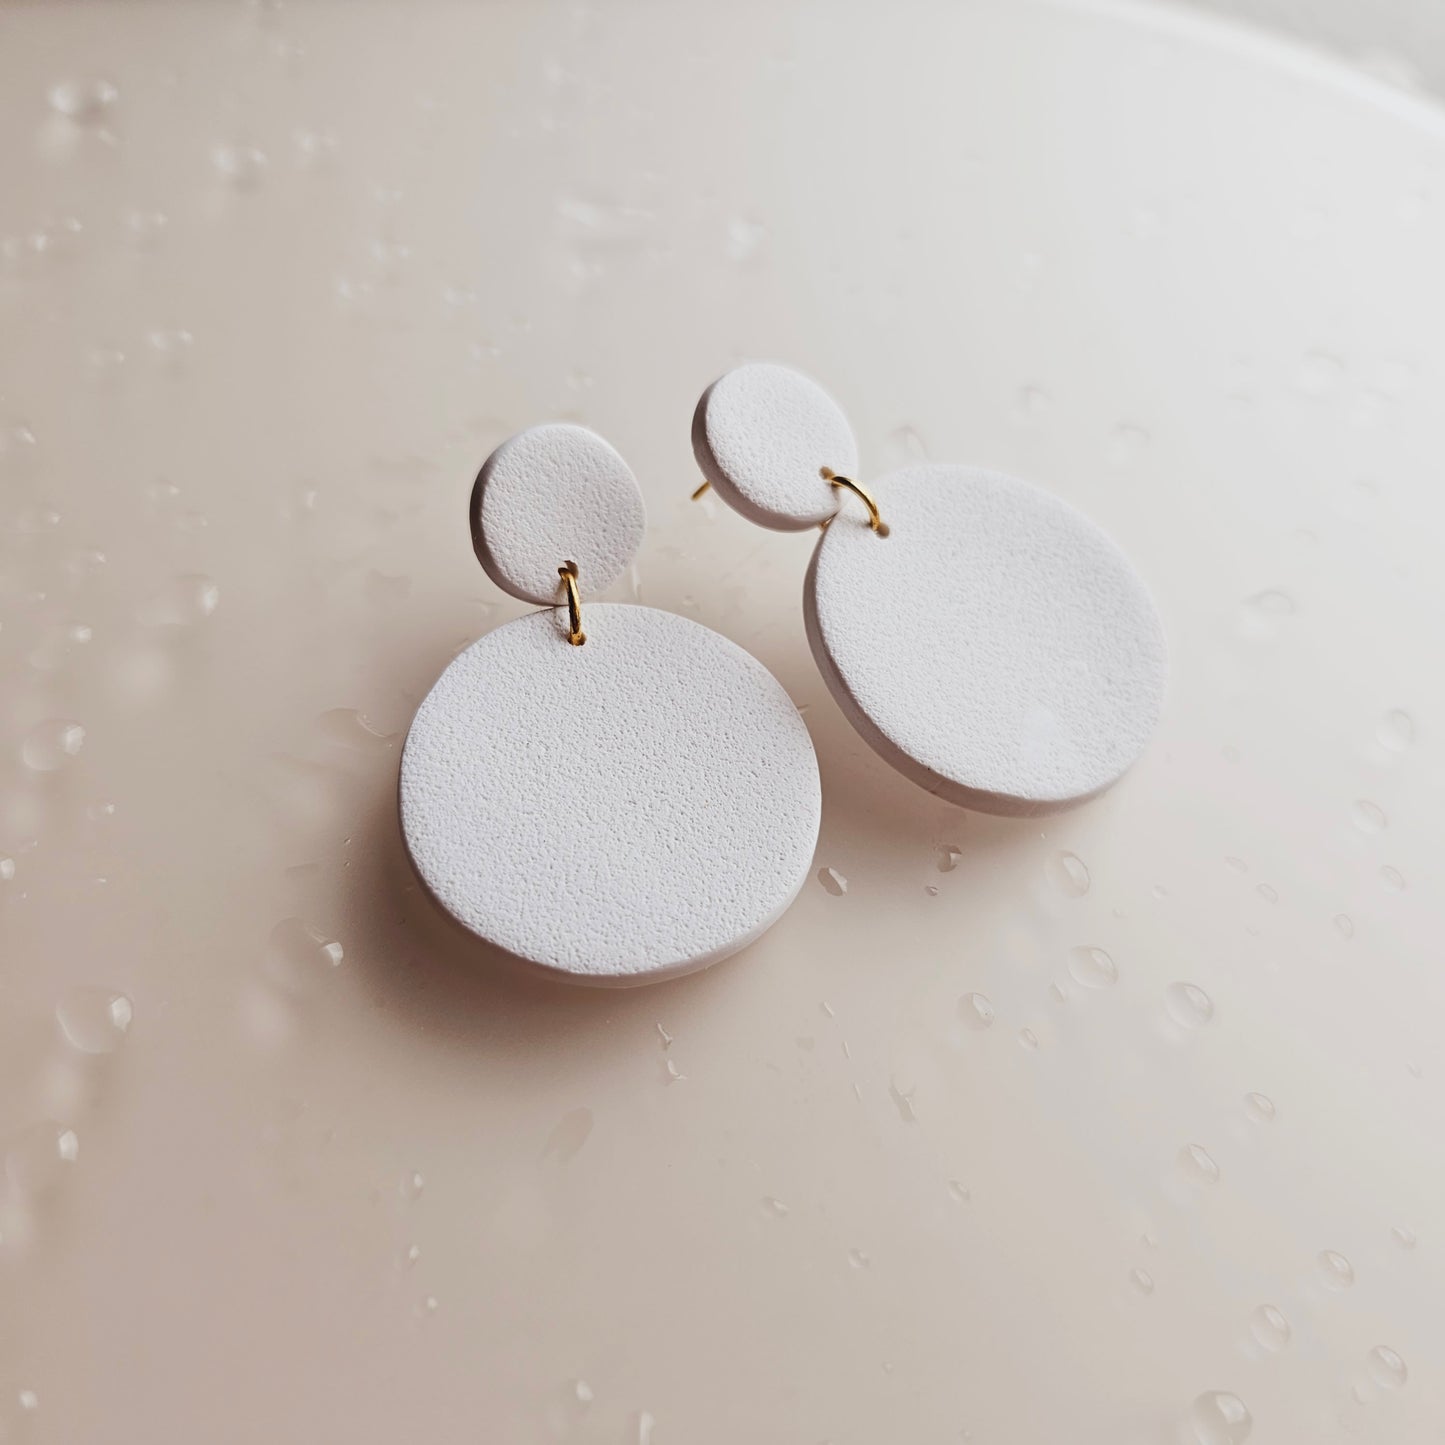 Audrey | Circle statement earrings | Textured earrings | Concrete earrings | Lightweight earrings | Neutral toned earrings